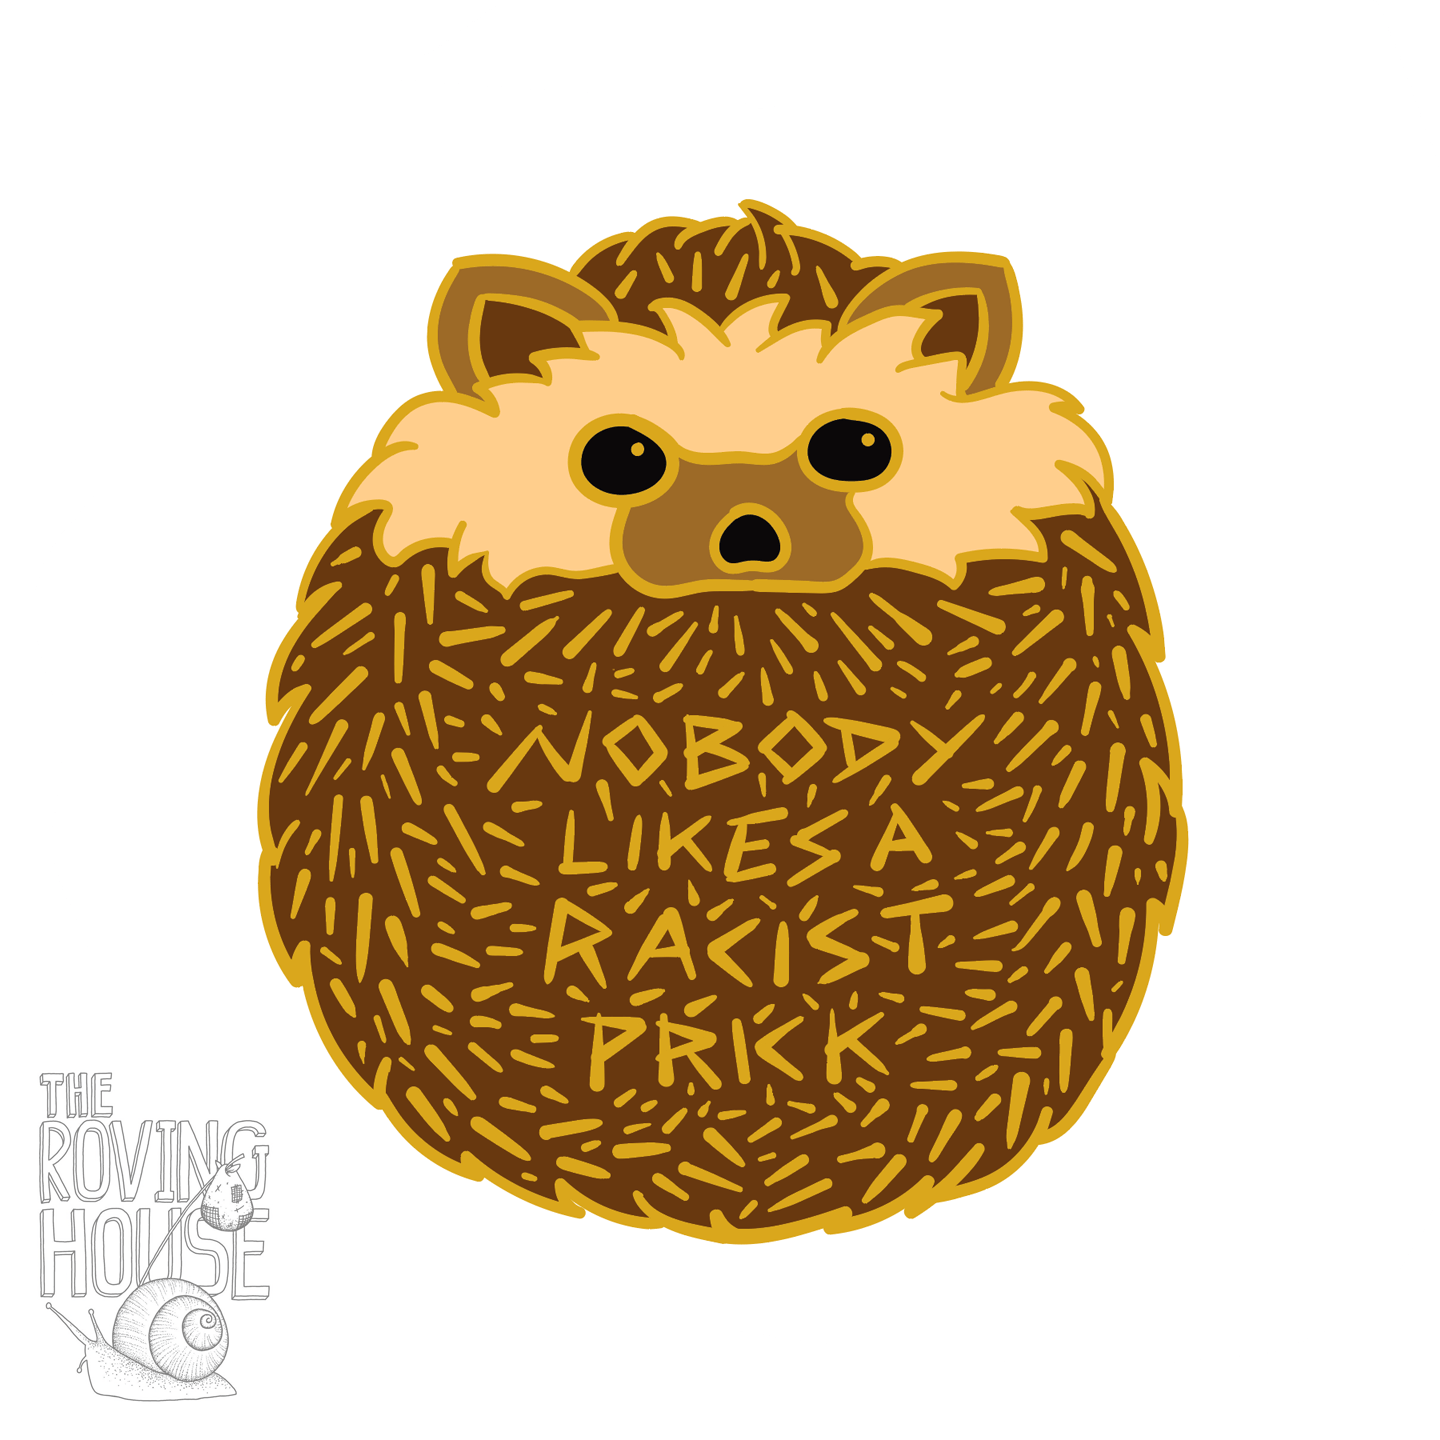 A brown and gold sticker design resembling a rolled up hedgehog. Within the hedgehog's spines are the words "NOBODY LIKES A RACIST PRICK".